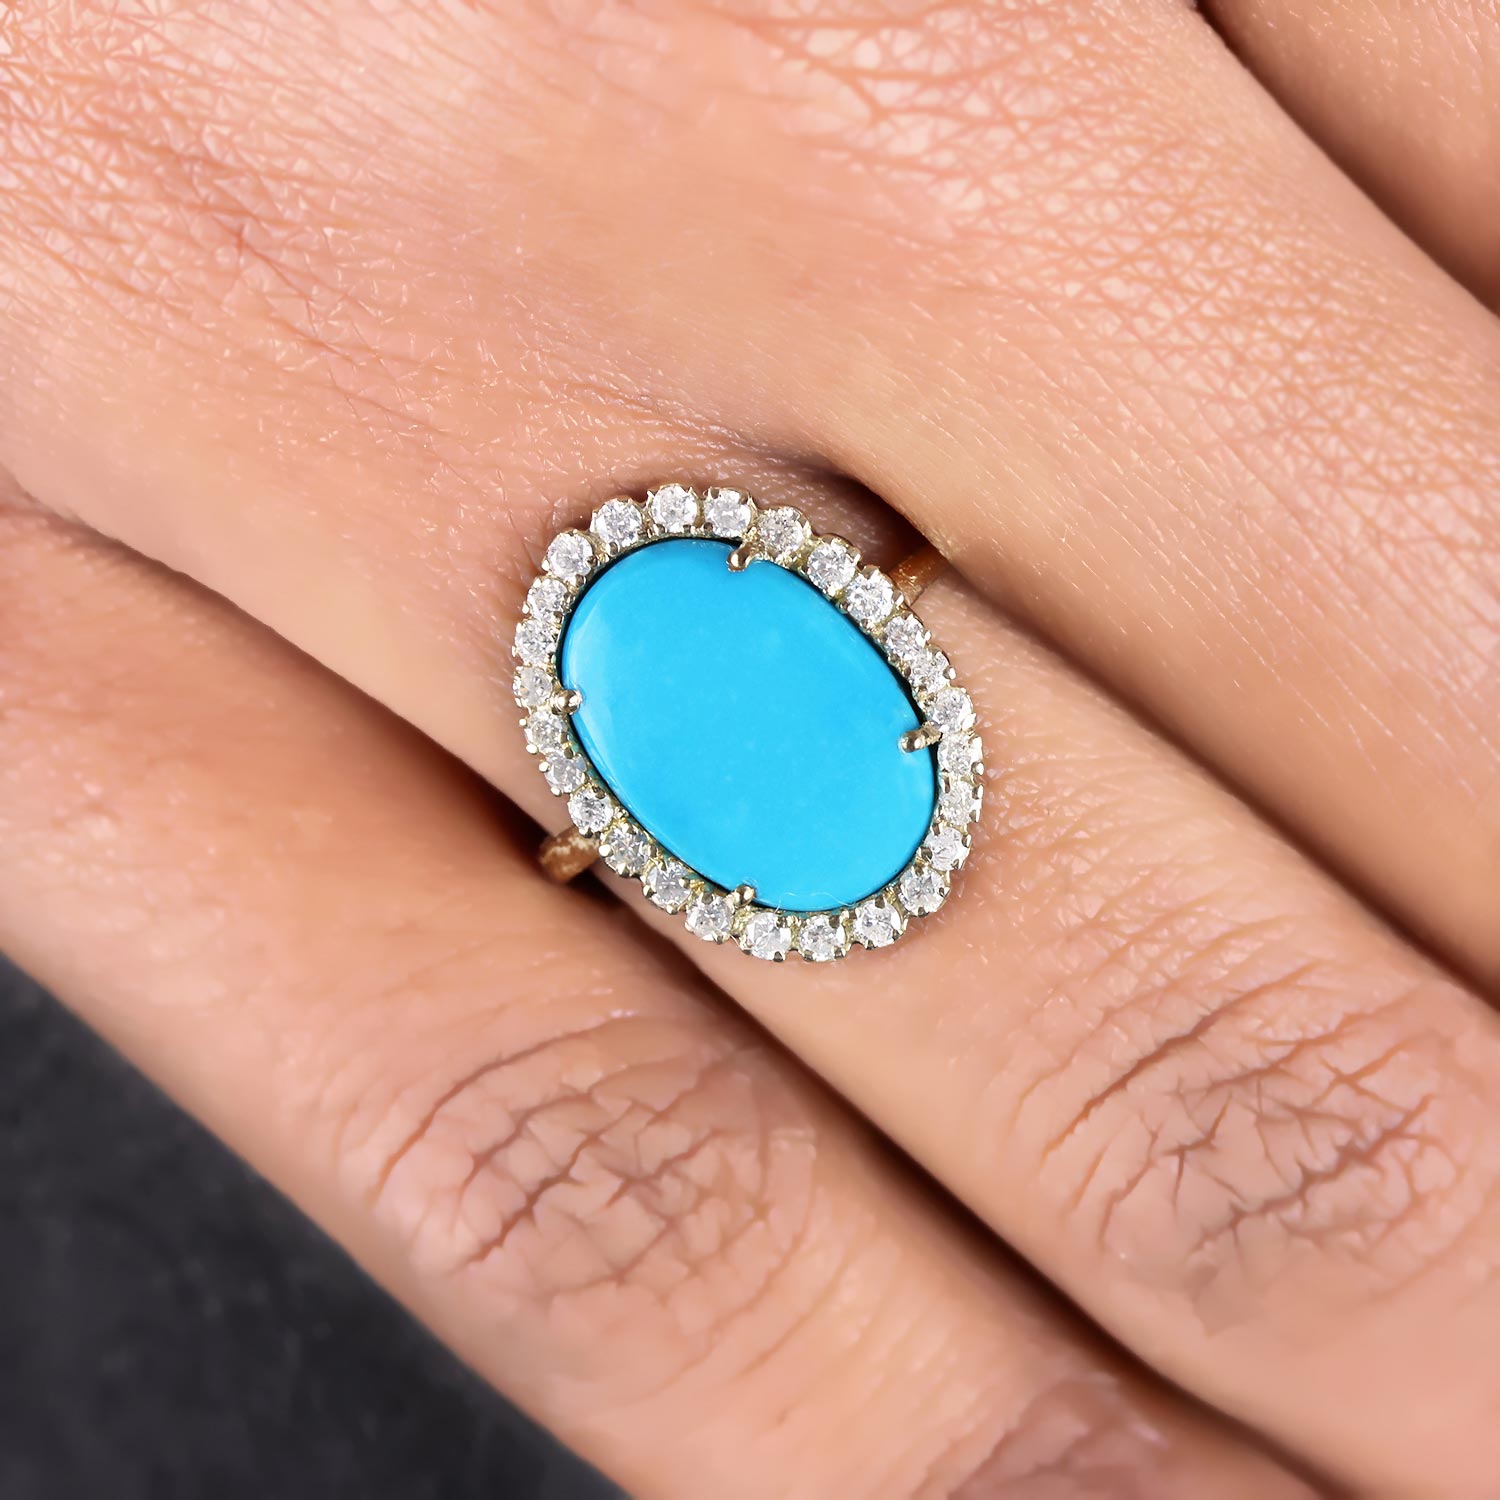 14K Solid Gold Pave Diamond Ring Turquoise Gemstone Jewelry